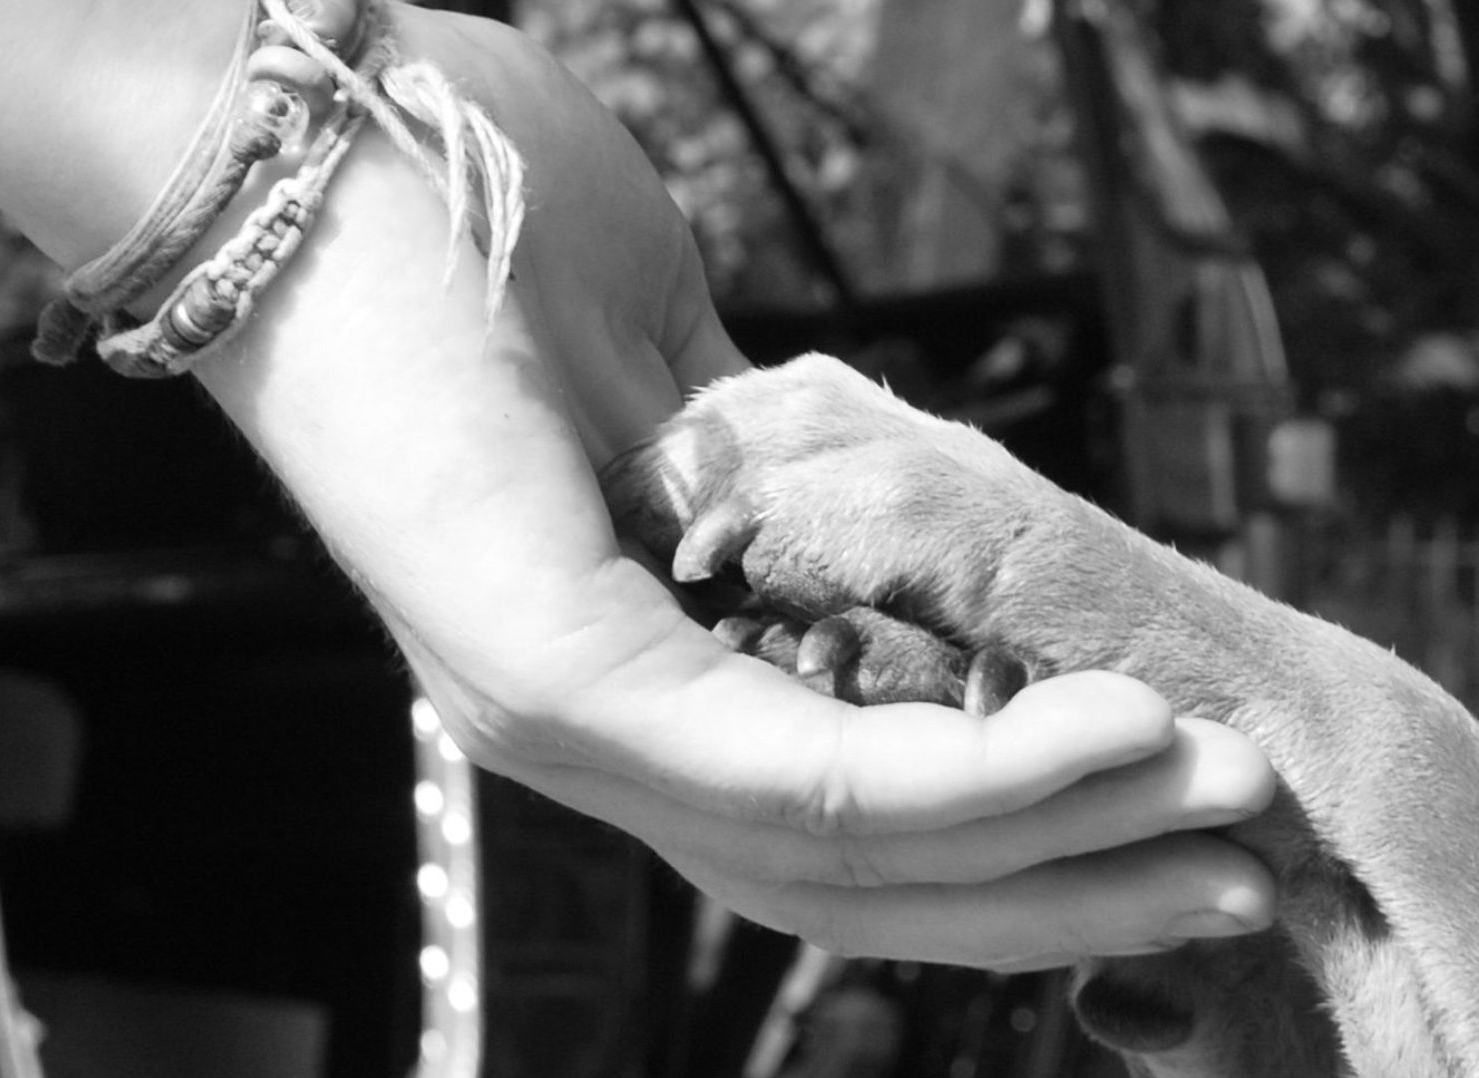 A dog's paws resting in the palm of a person's hand.